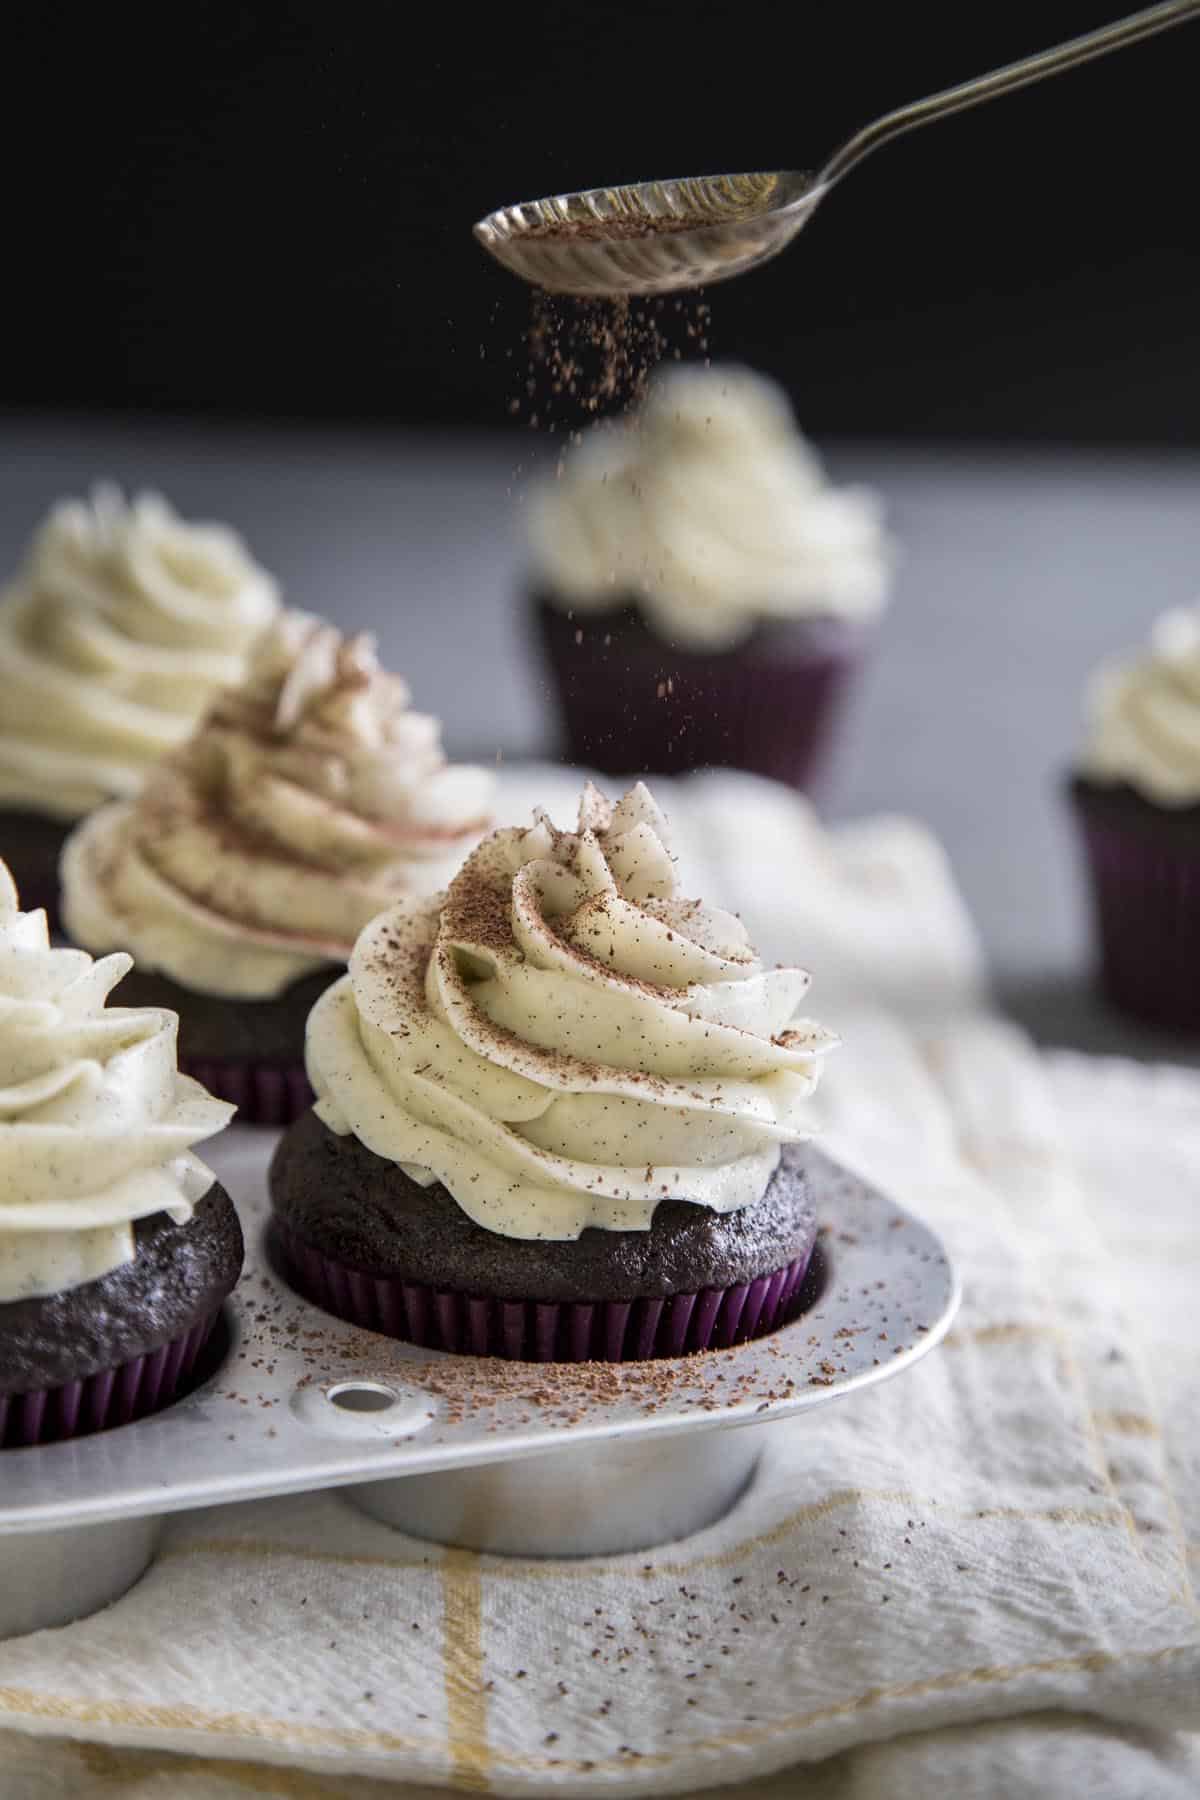 Sprinkling chocolate shaving over chocolate cupcakes with swiss meringue buttercream